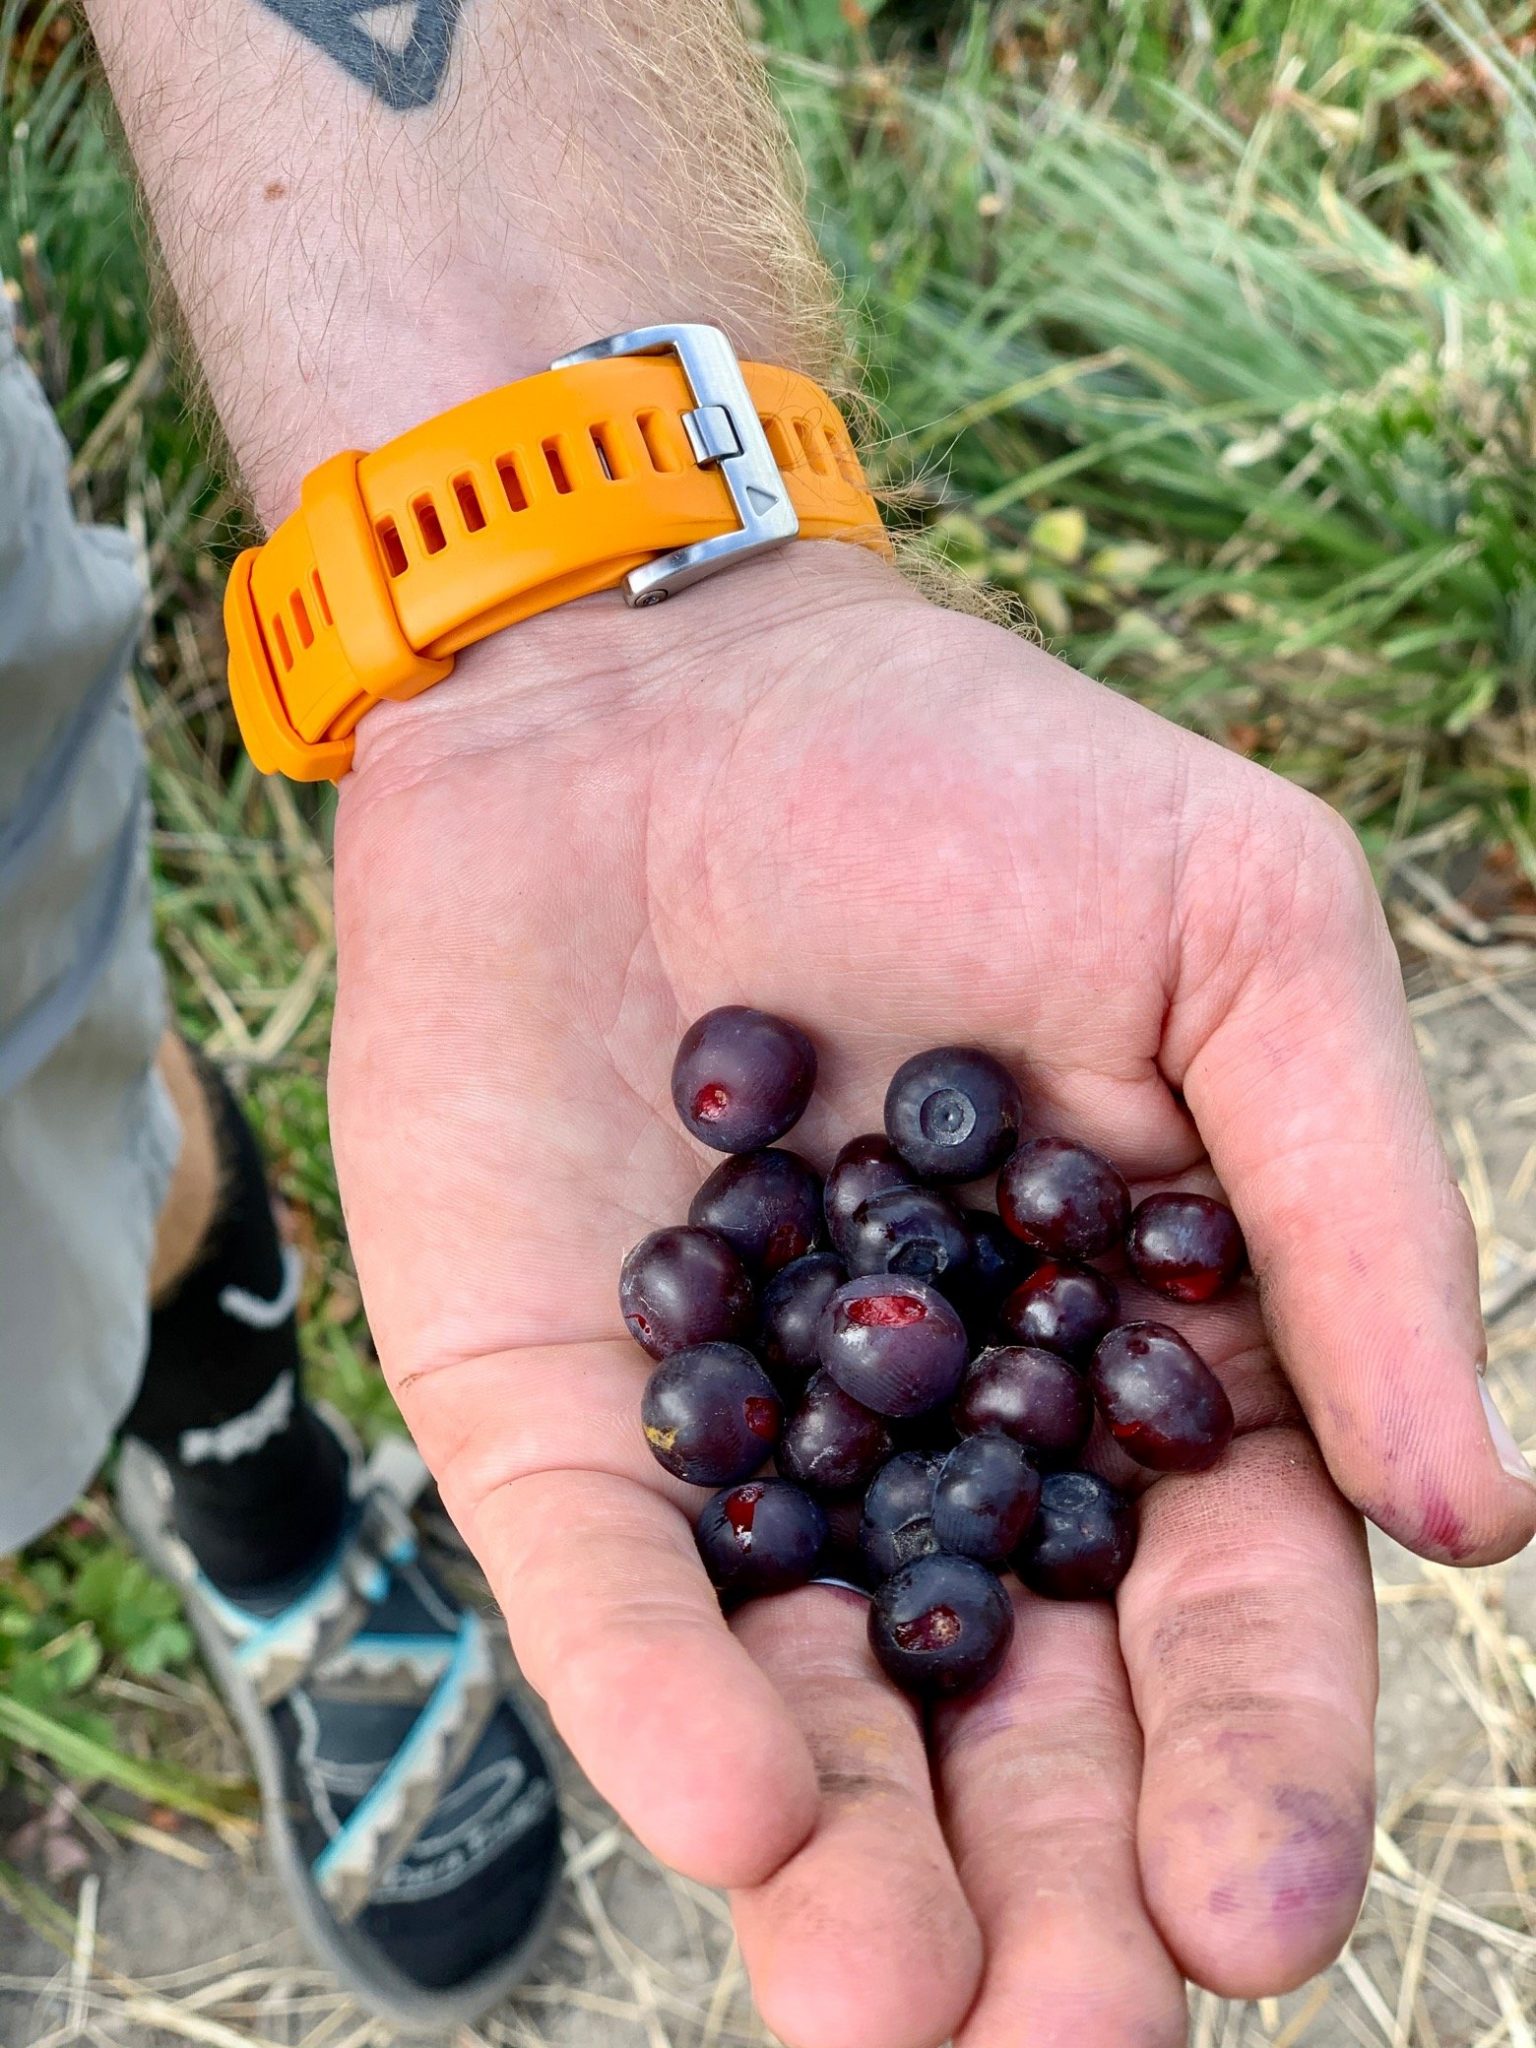 A fistful of huckleberries